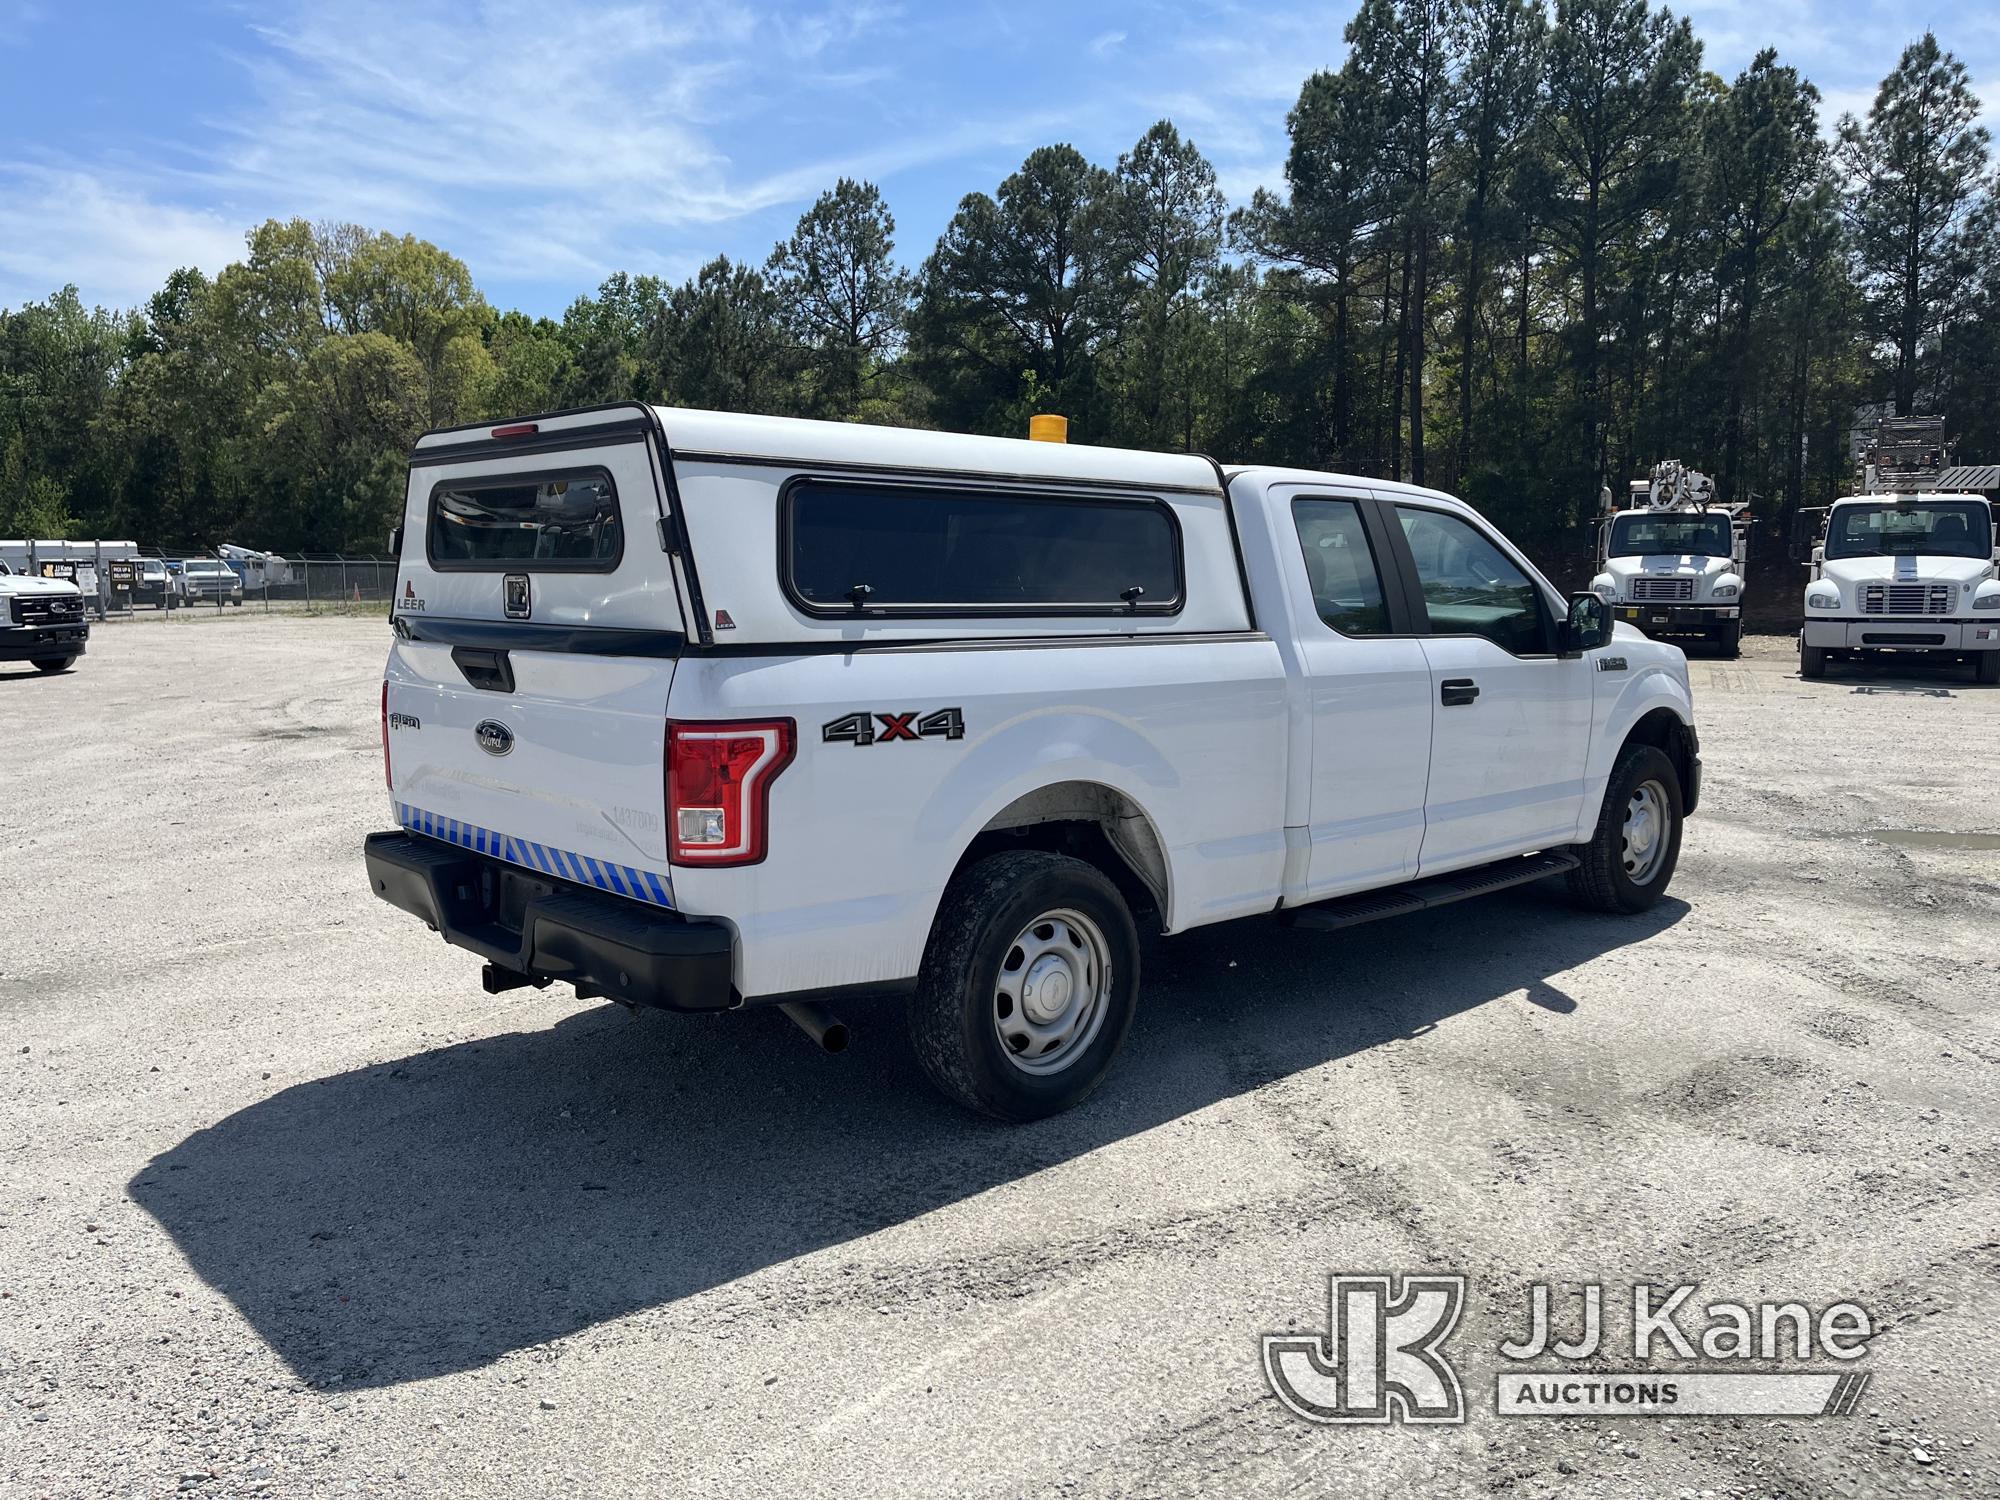 (Chester, VA) 2017 Ford F150 4x4 Extended-Cab Pickup Truck, (Southern Company Unit) Runs & Moves